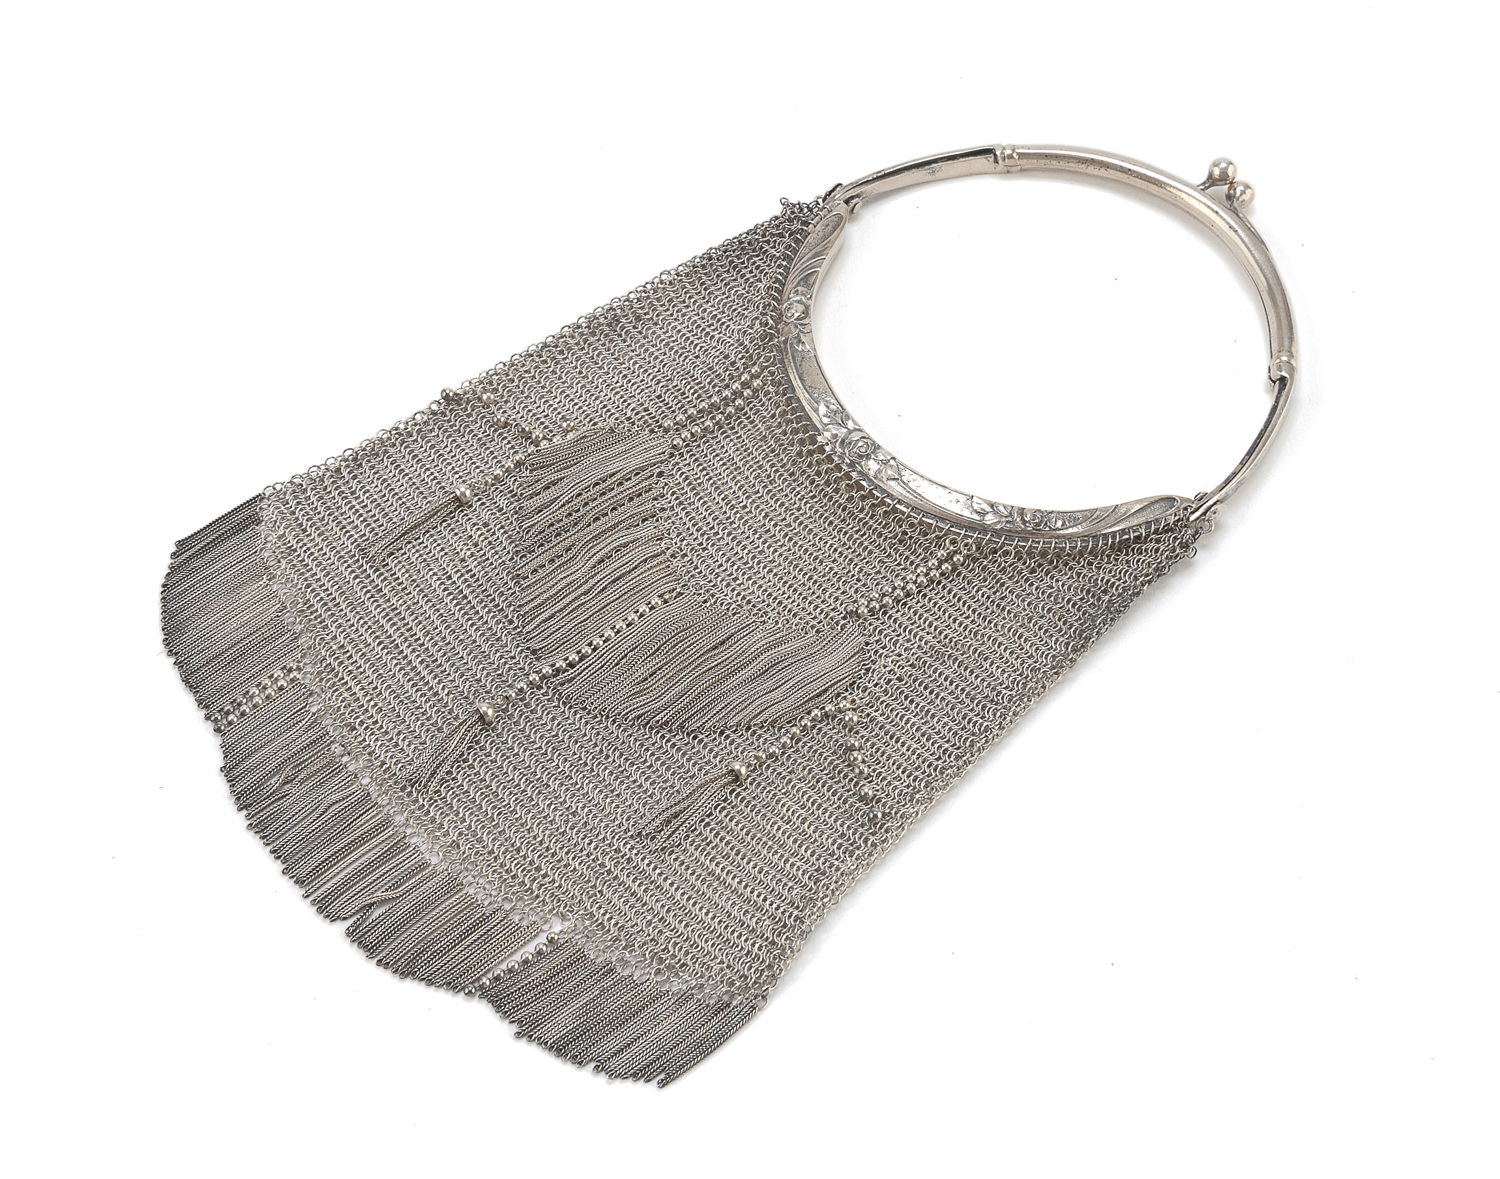 SILVER THEATER BAG GERMANY EARLY 20TH CENTURY